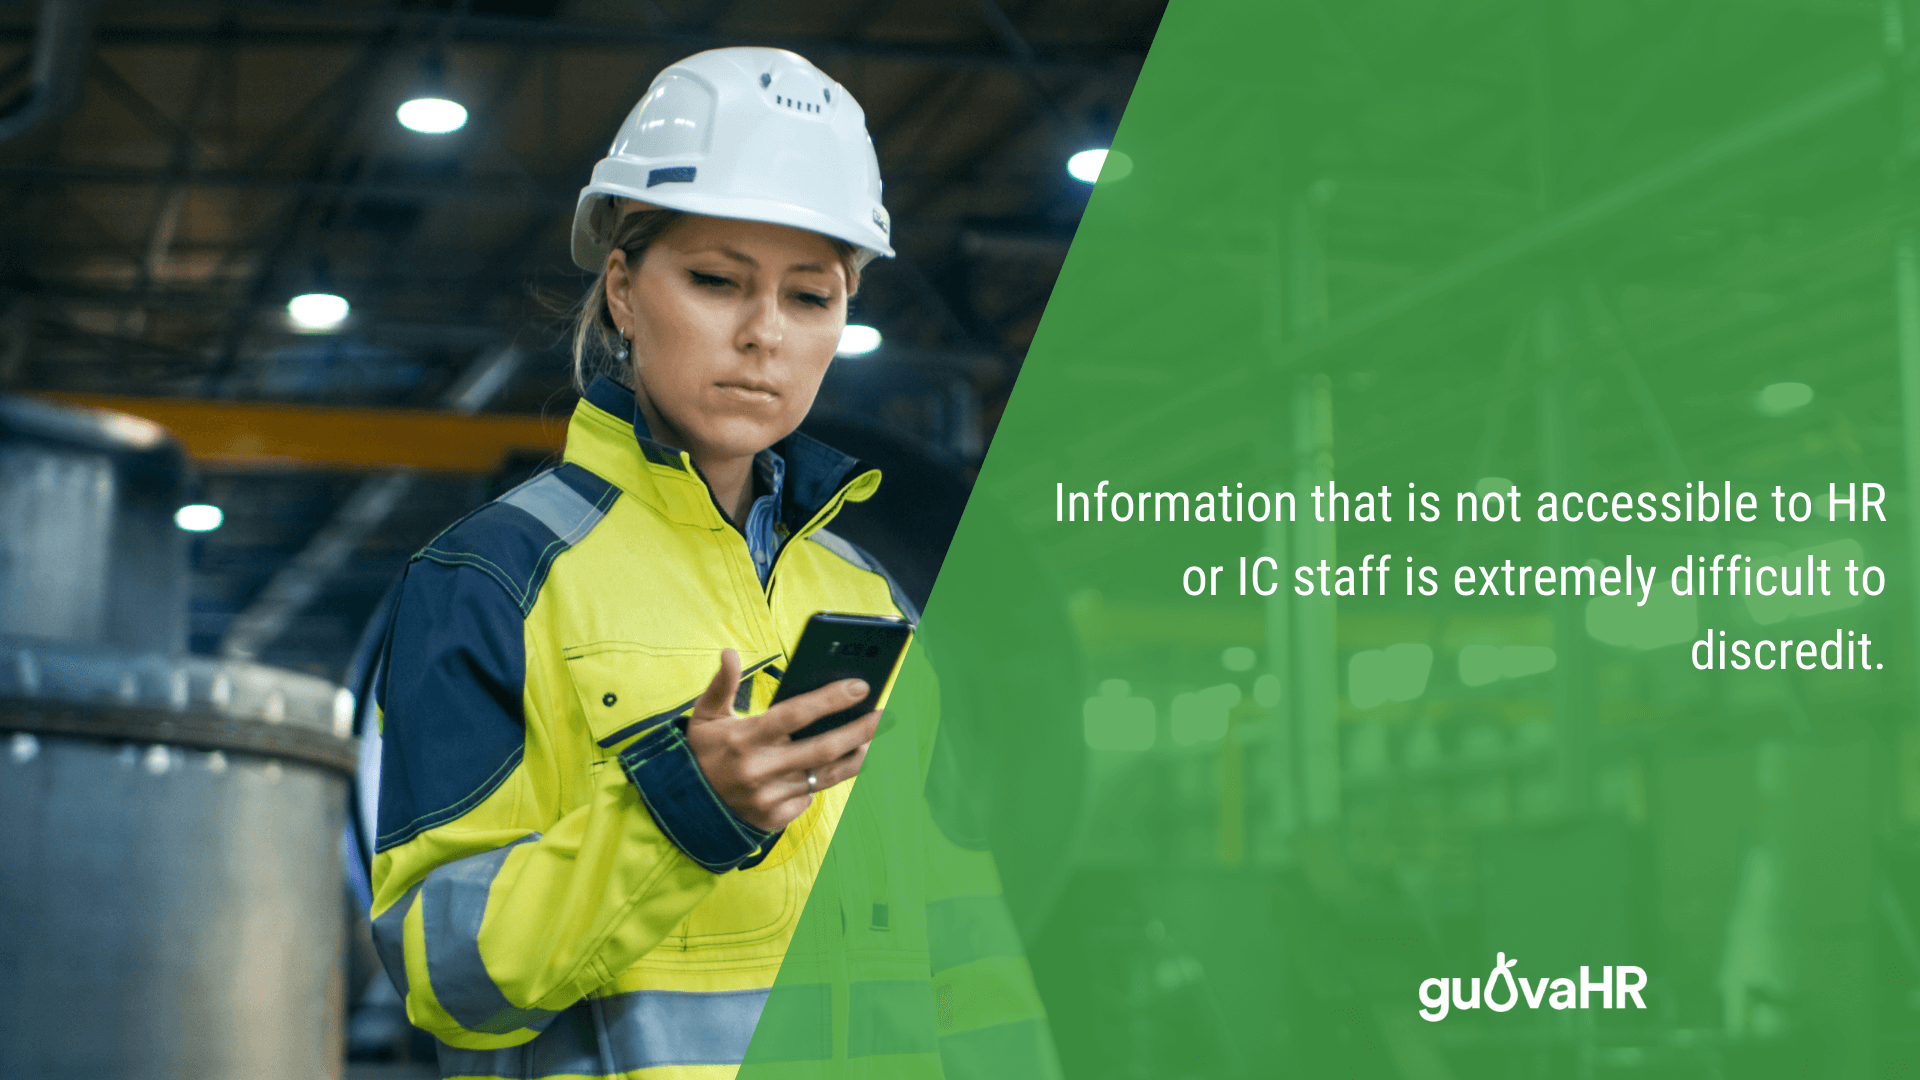 Female worker in safety clothing using a smart phone and an internal communication quote saying 'Information that is not accessible to HR or IC staff is extremely difficult to discredit.'